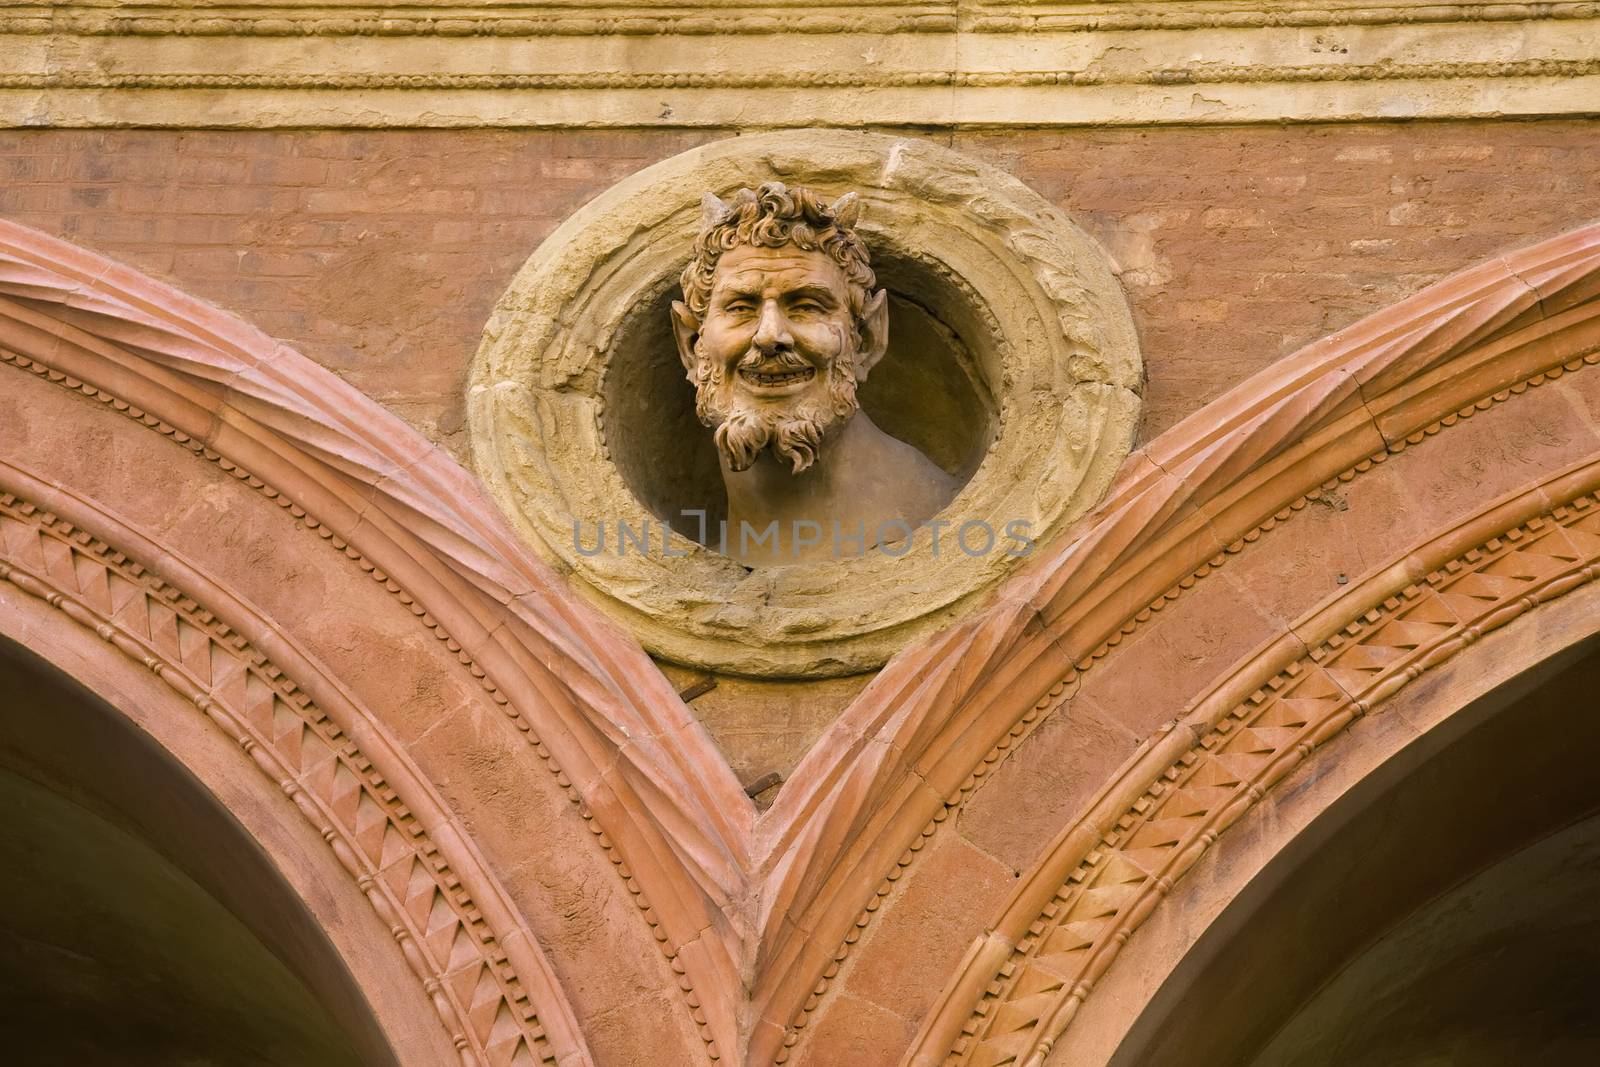 The devil's head - decoration on the old, medieval building in Bologna, Italy